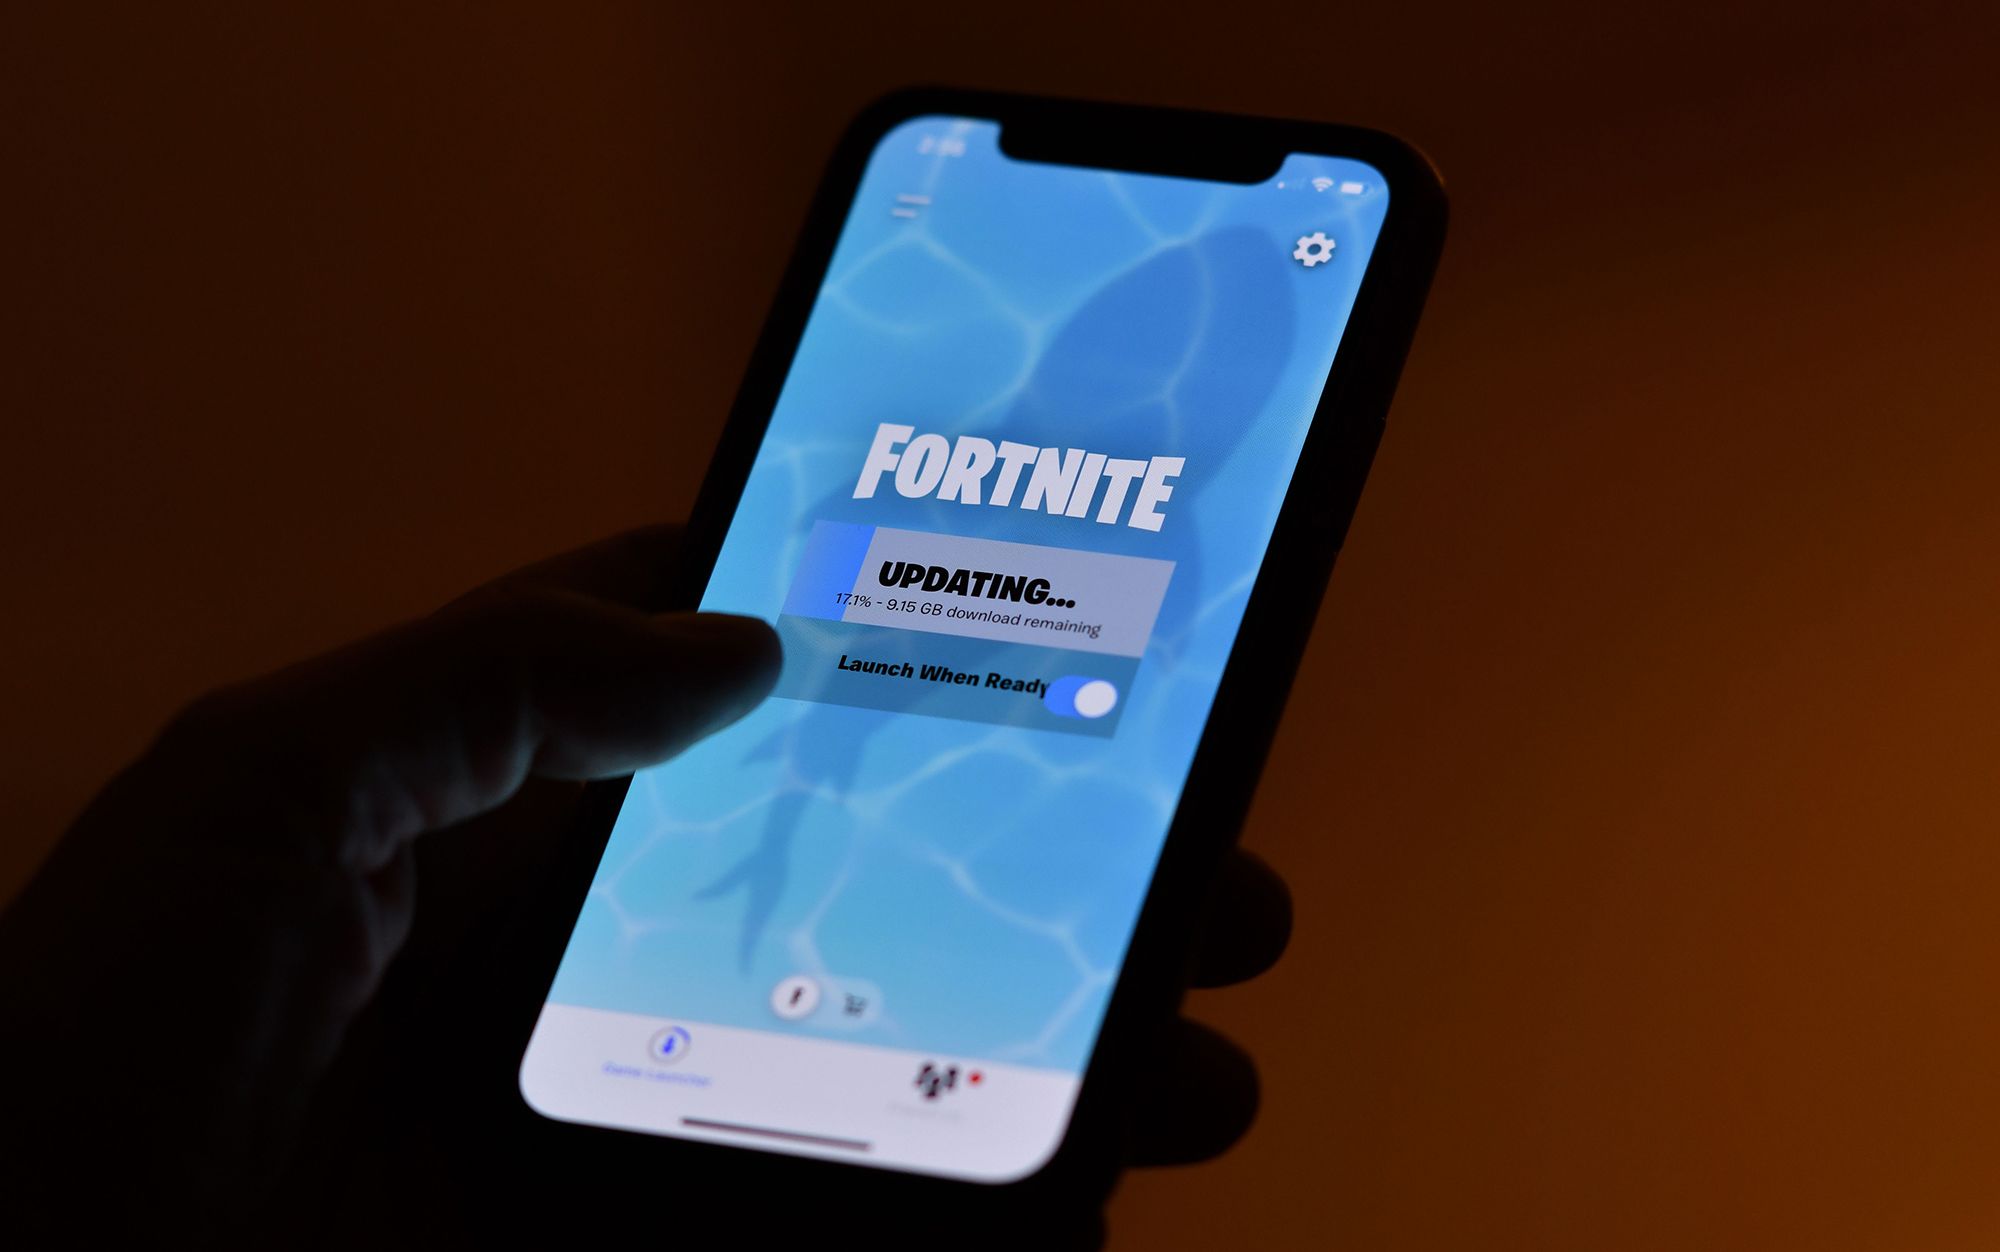 Epic Games respond to claims that they failed to pay Fortnite pros -  Fortnite INTEL